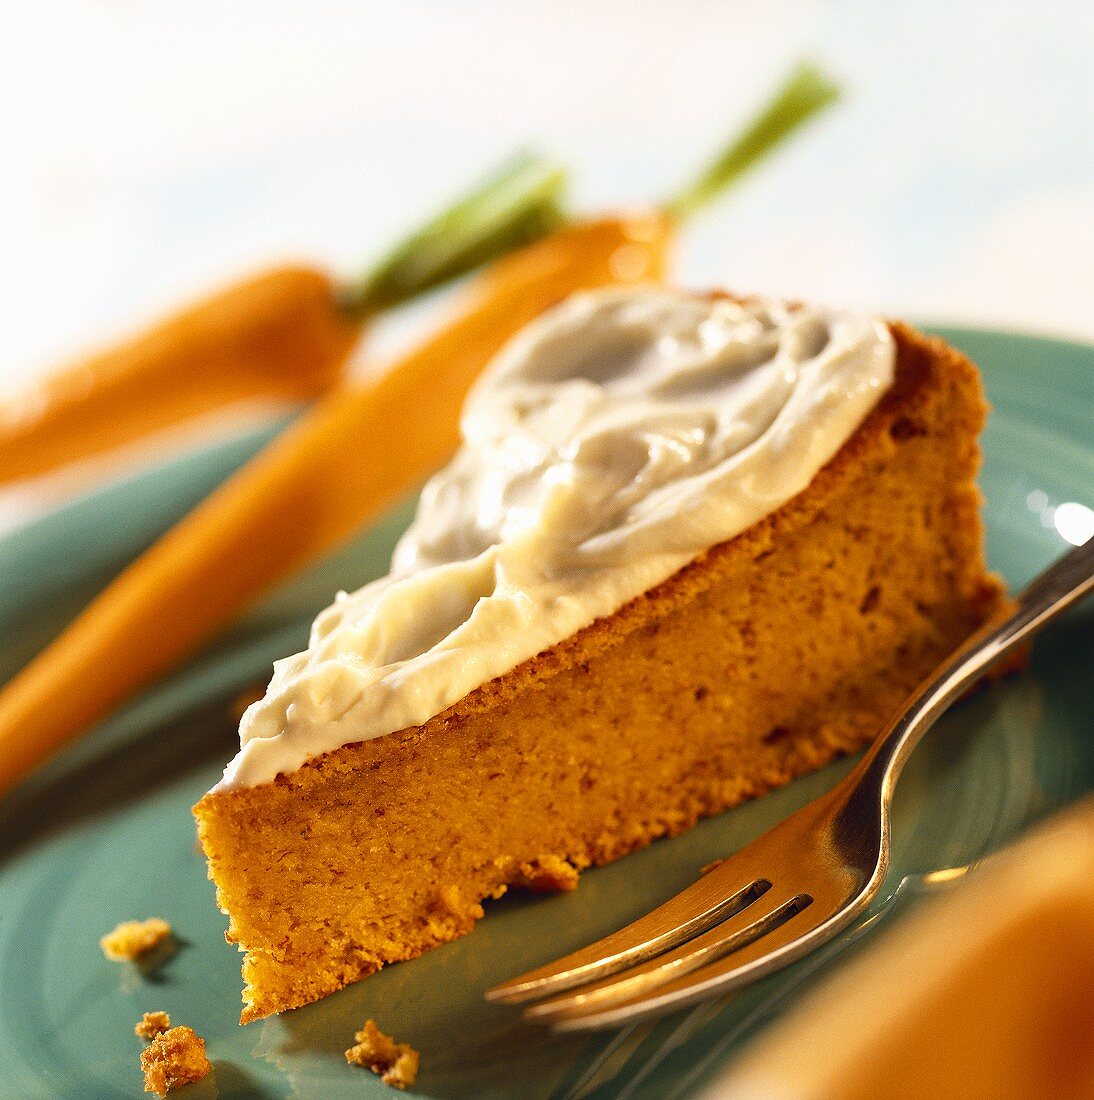 A piece of carrot cake with mascarpone